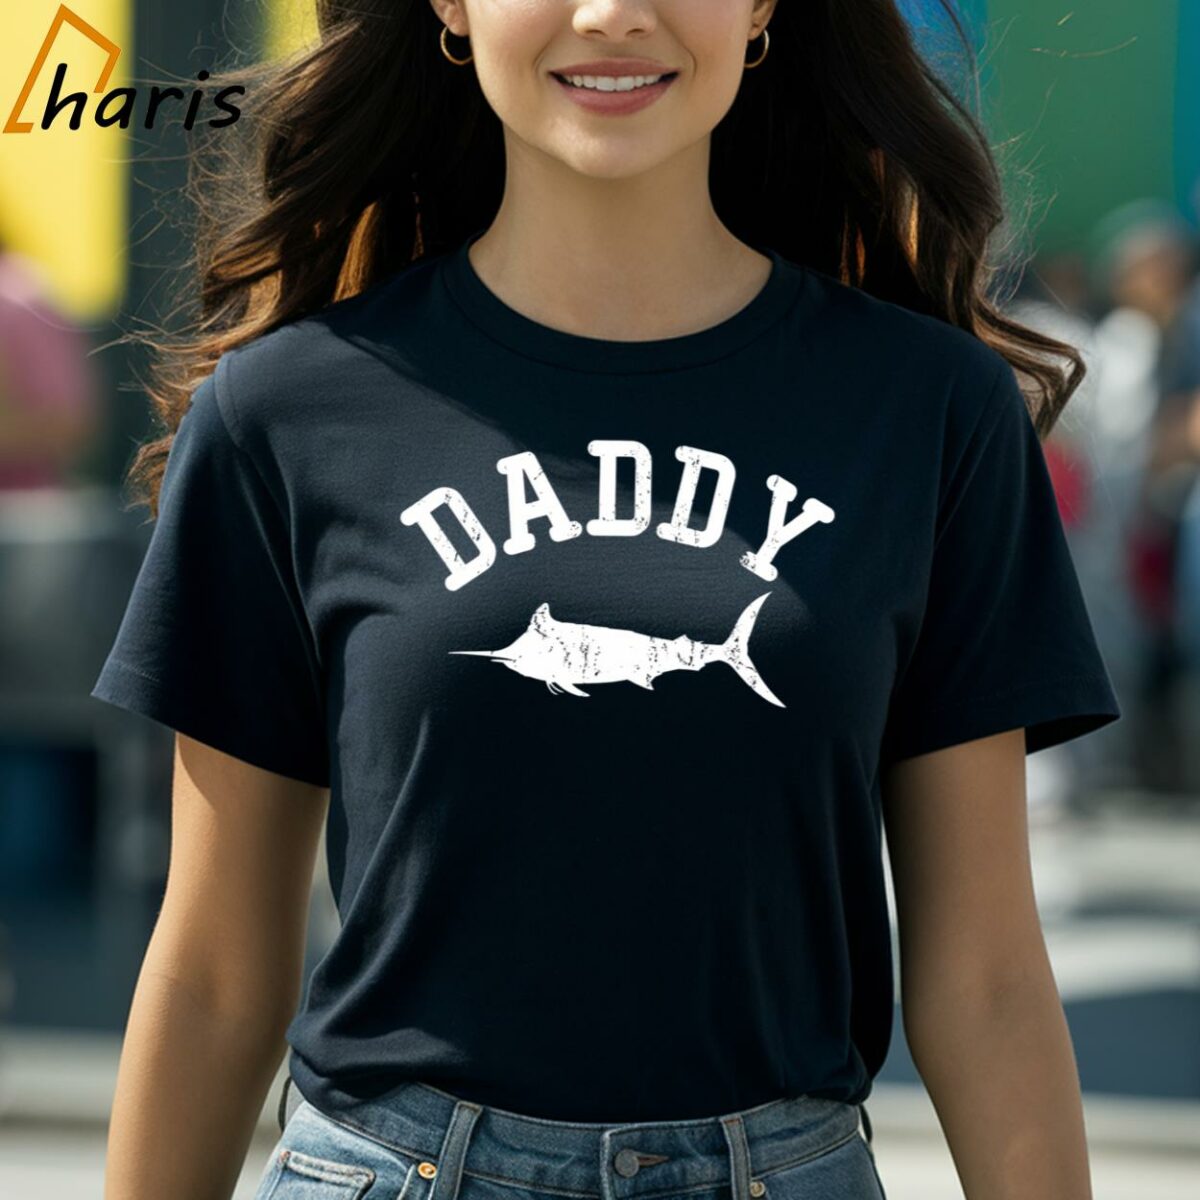 Daddy Marlin Vintage T shirt Gift Ideas For Dad 2 Shirt